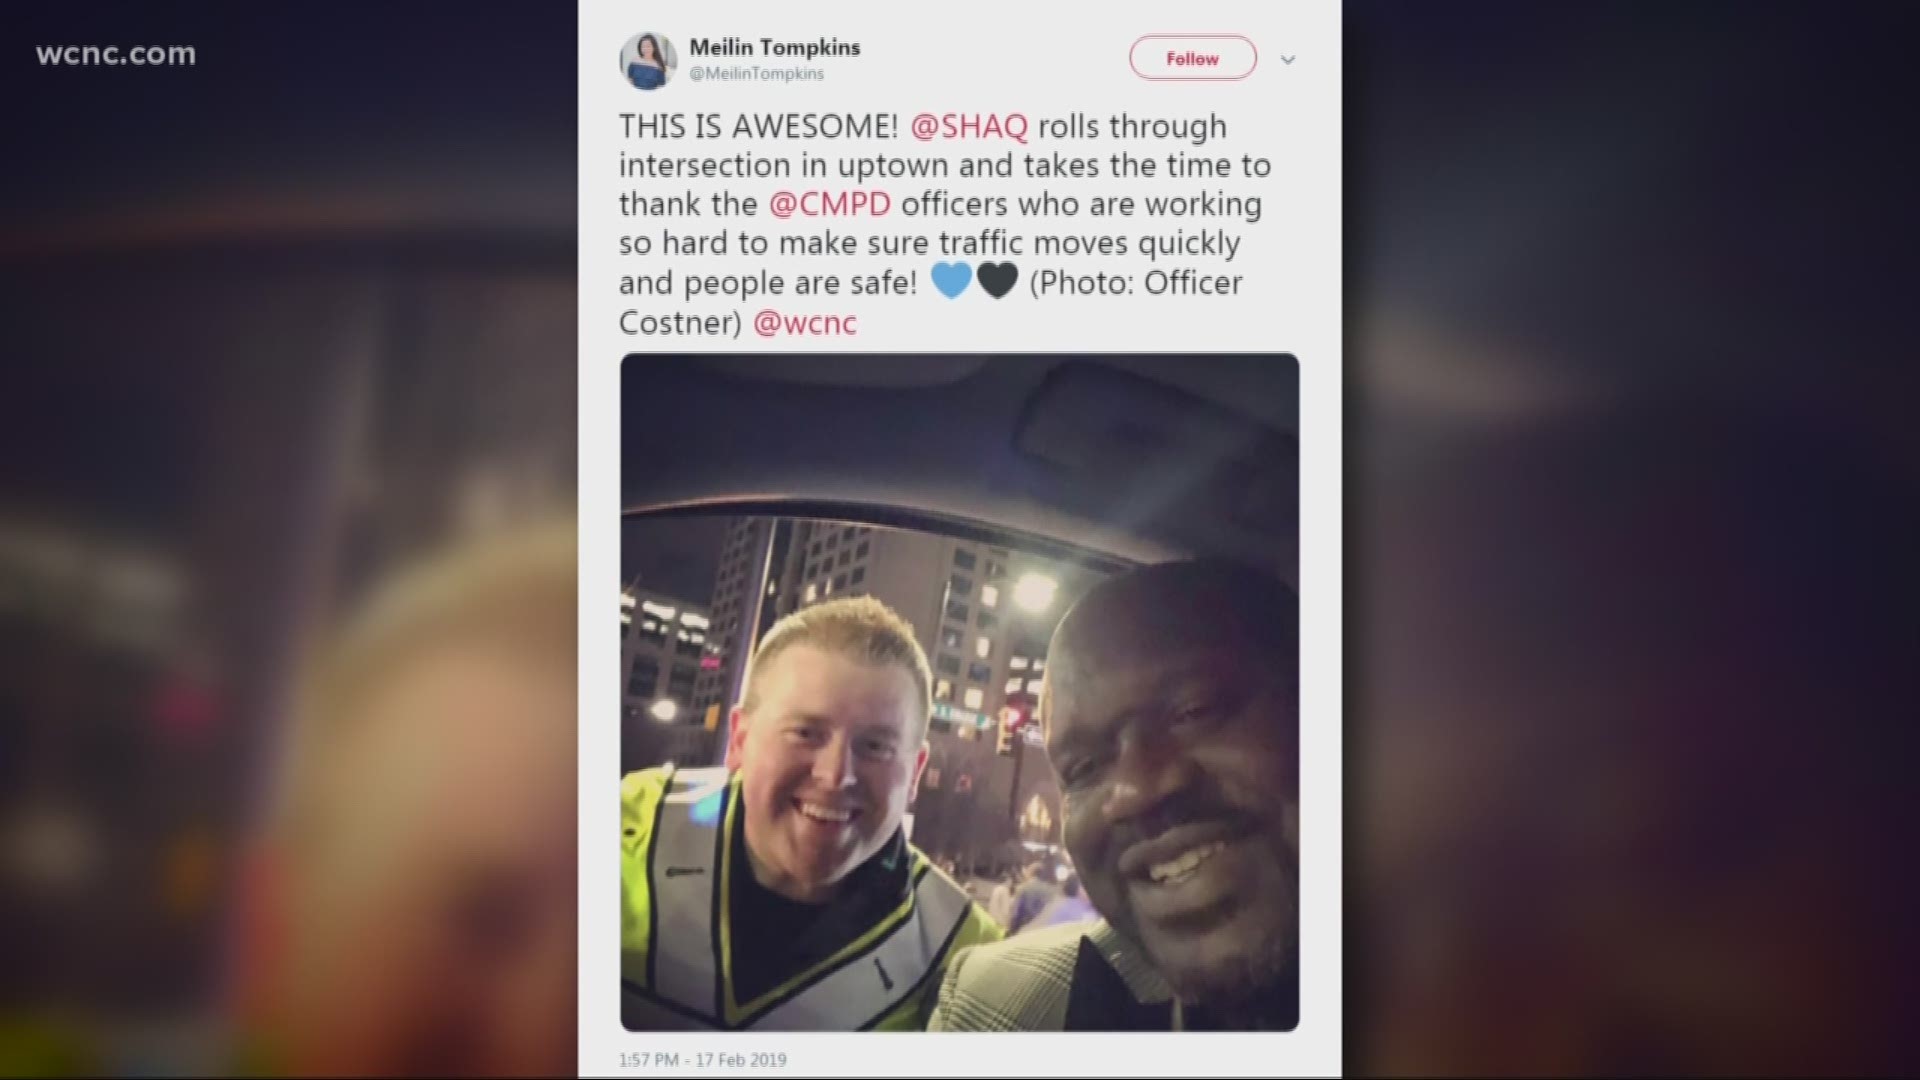 Shaq drove through uptown, taking time to thank CMPD officers working hard to make sure traffic keeps moving and people stay safe.